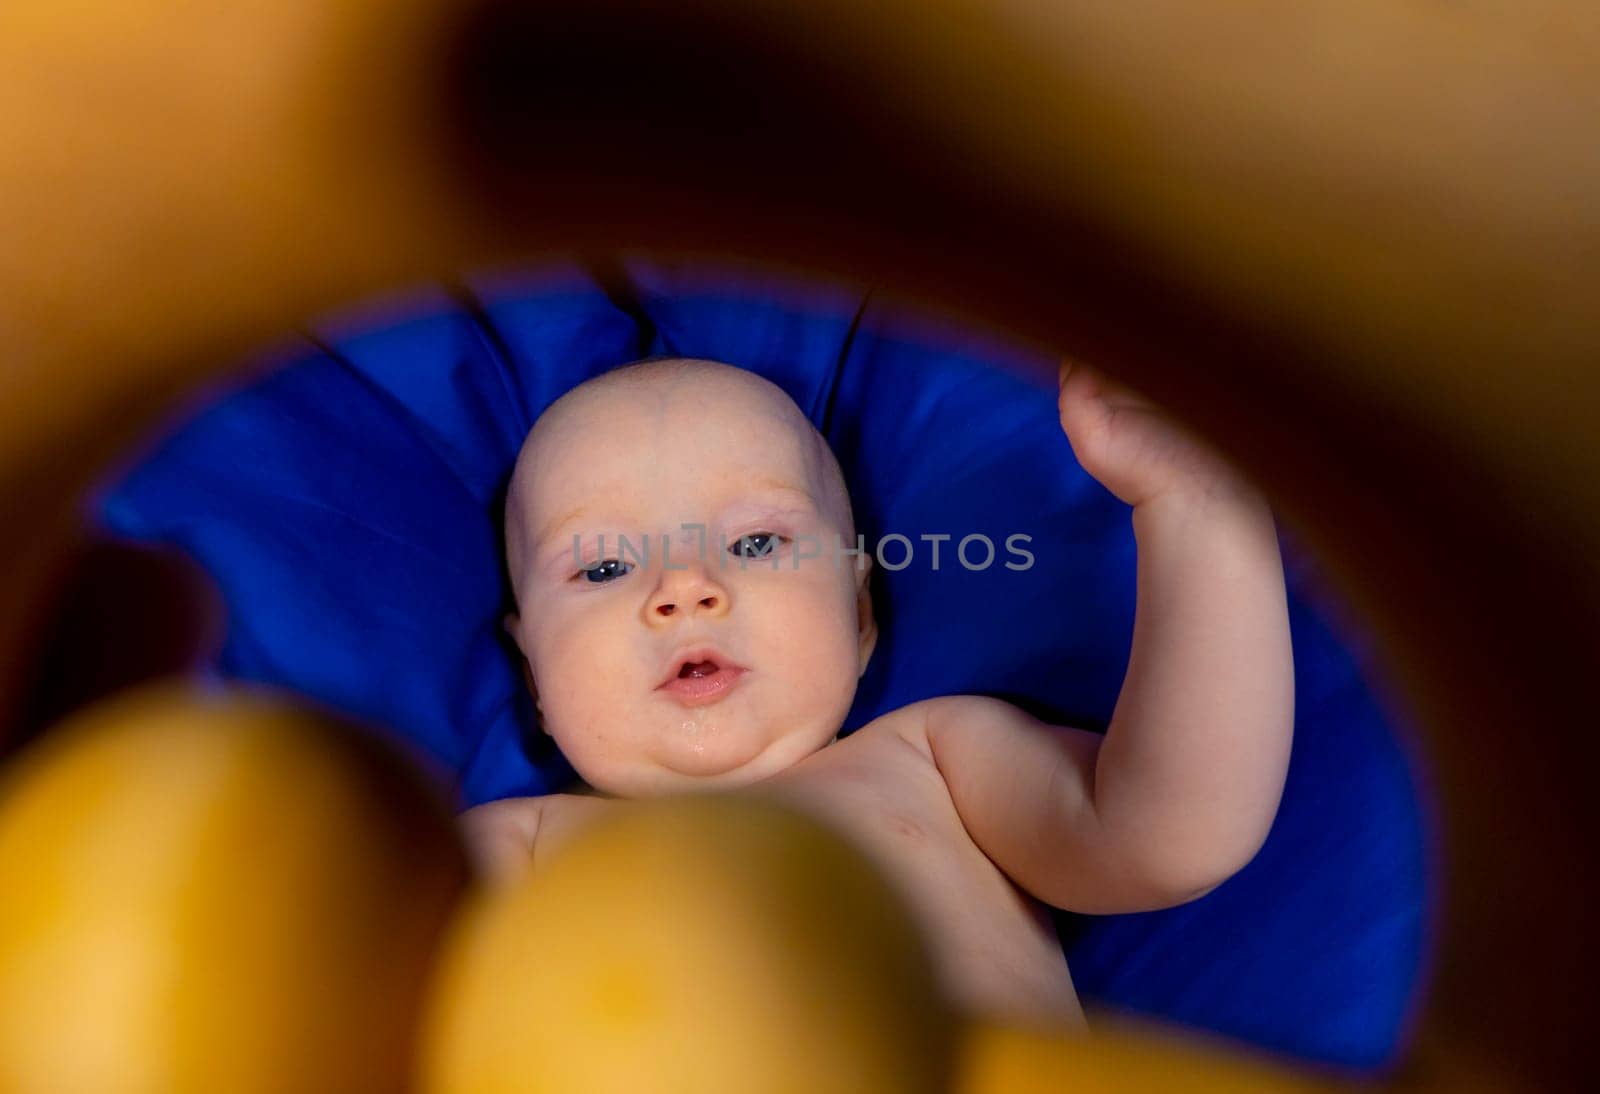 a baby in a tiger diaper on a blue background with a wooden rattle